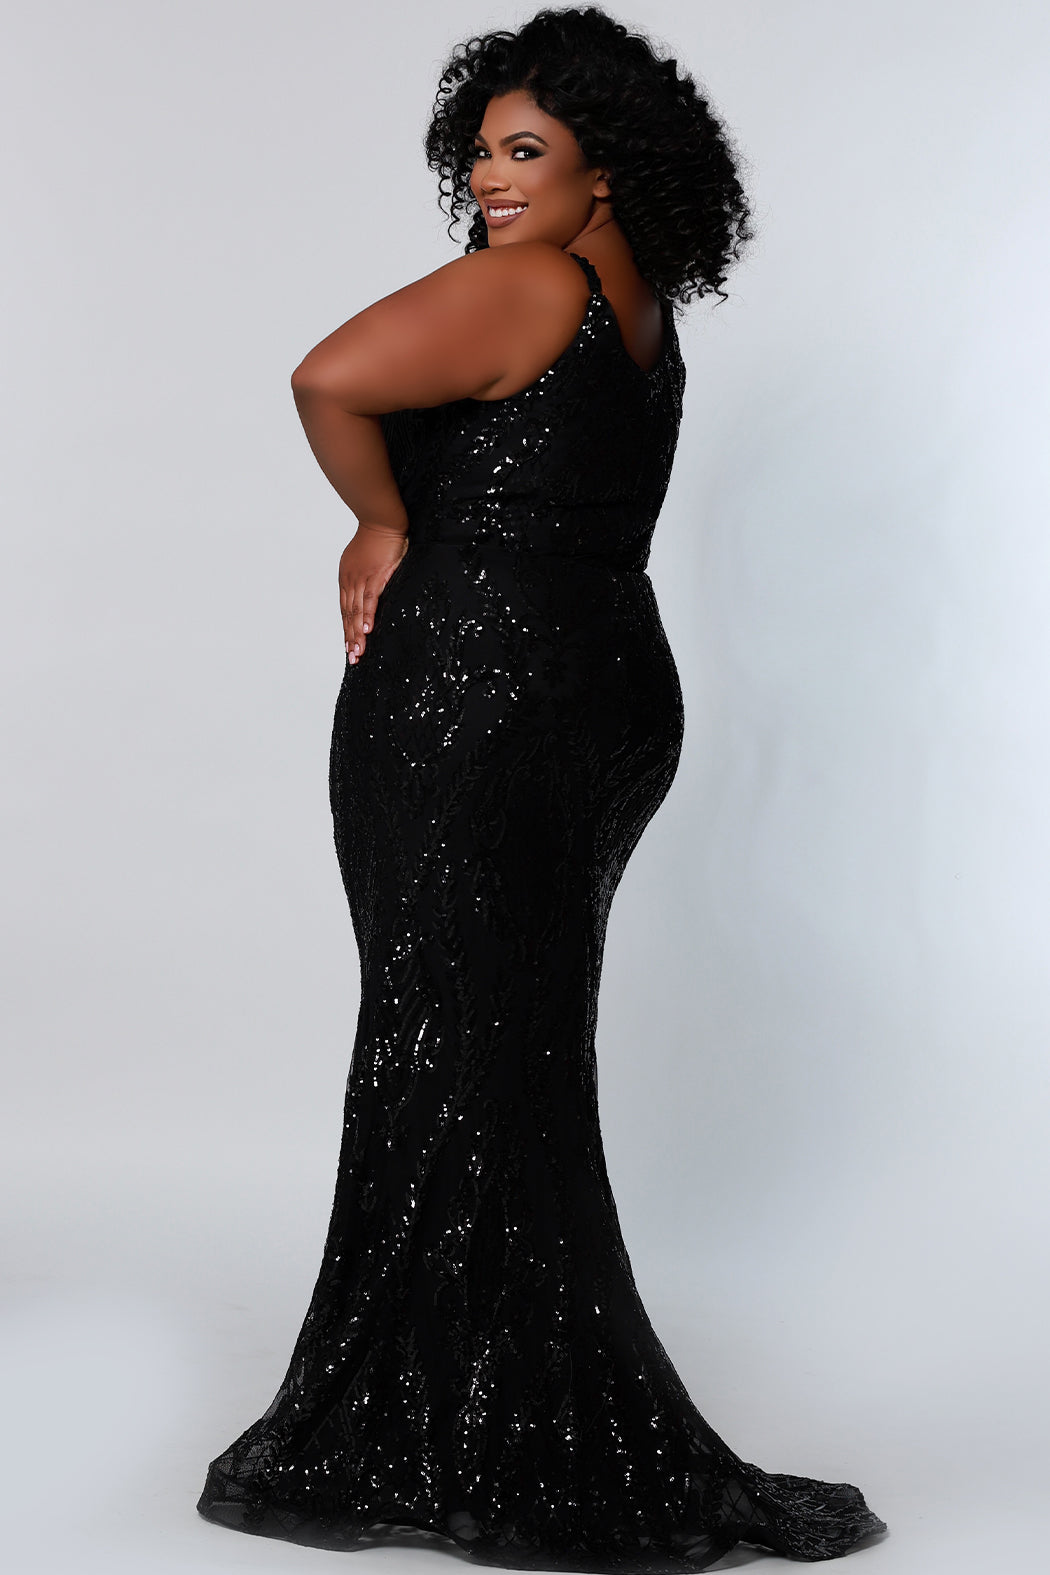 Sydneys Closet SC7332 Long Fitted Sequin Formal Plus Size Prom Dress Evening Gown SC7332 Color: Black/Black Size Availability: 14-32 Slim A-line silhouette Scoop neckline ½ inch straps covered in lace Scoop back Center back zipper Sequins over stretch knit 5 inch train 2 inch horsehair hem